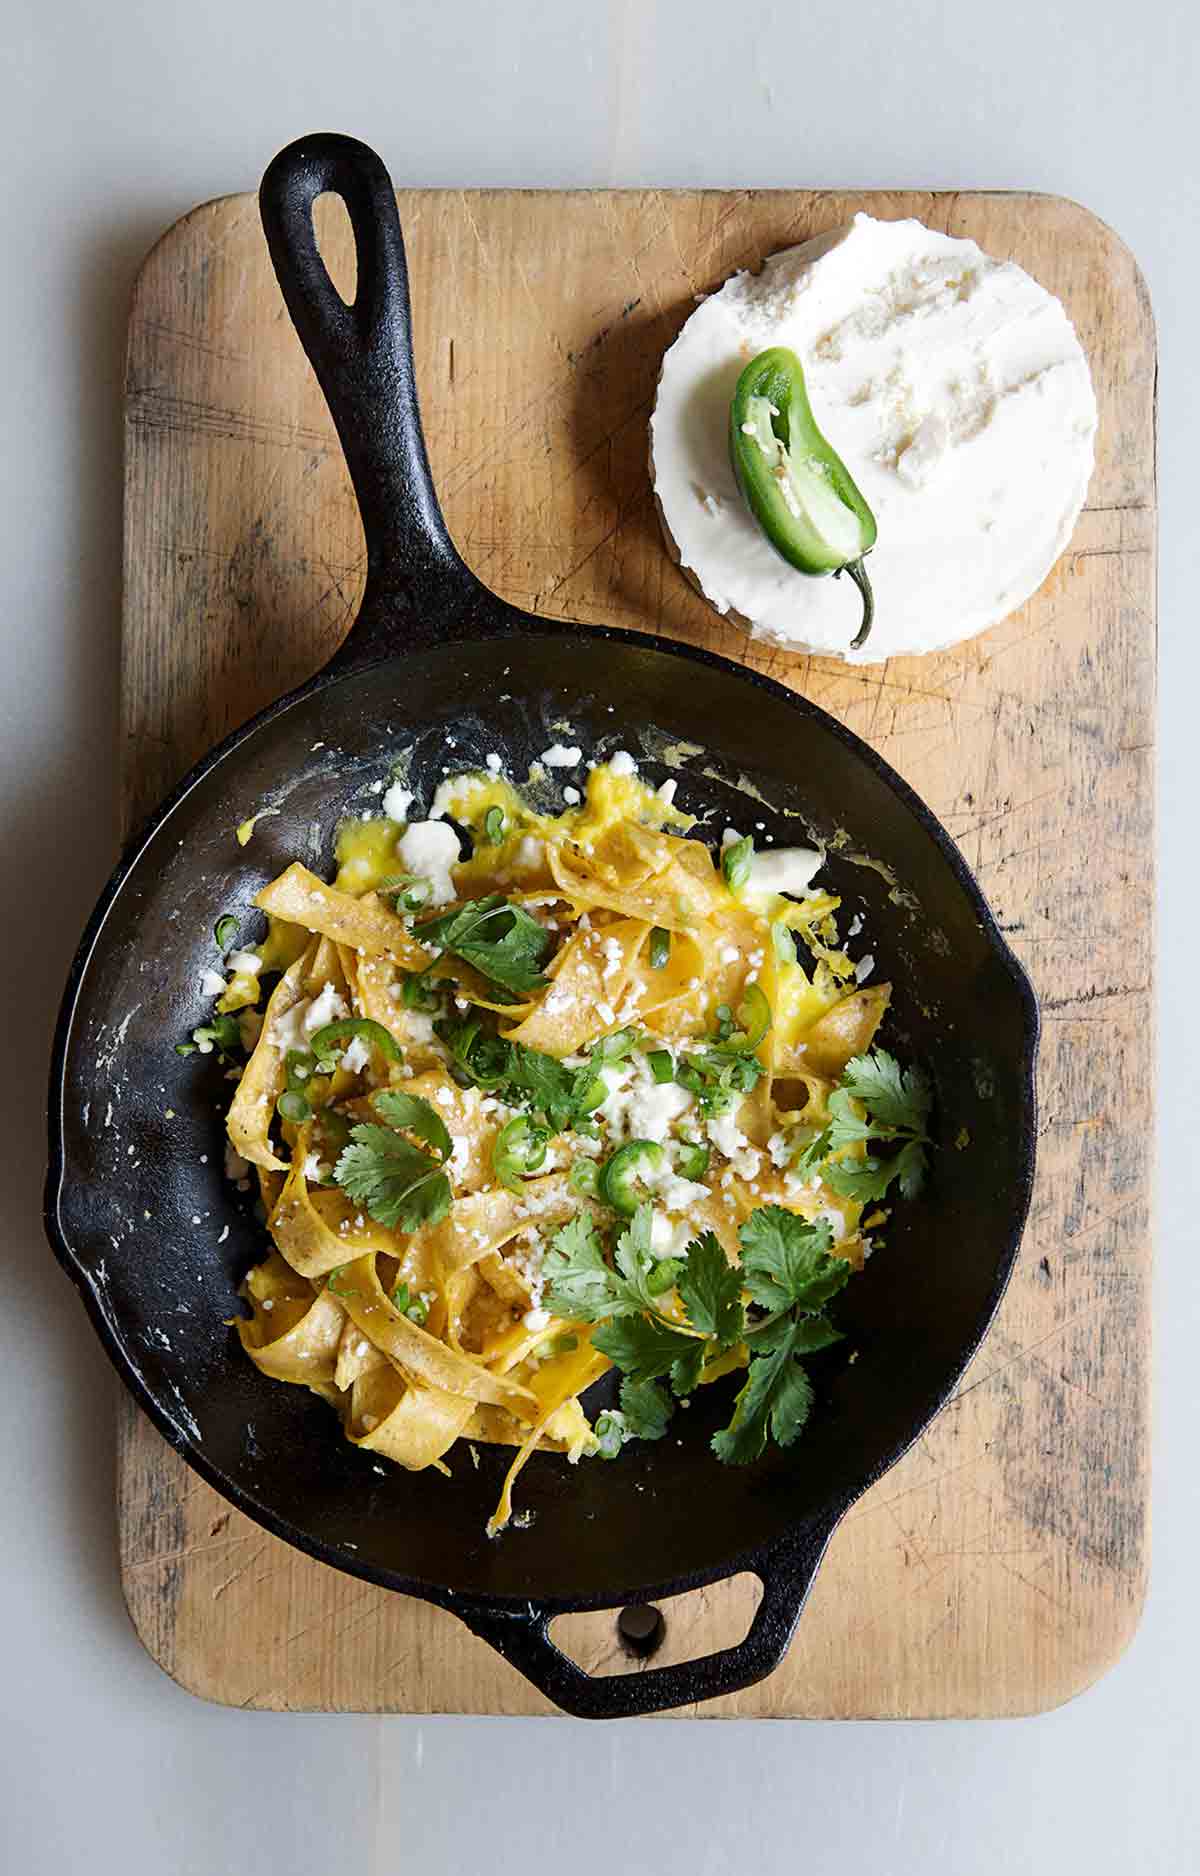 A skillet of chilaquiles on a wooden board with half a jalapeno and block of cotija cheese on the side.